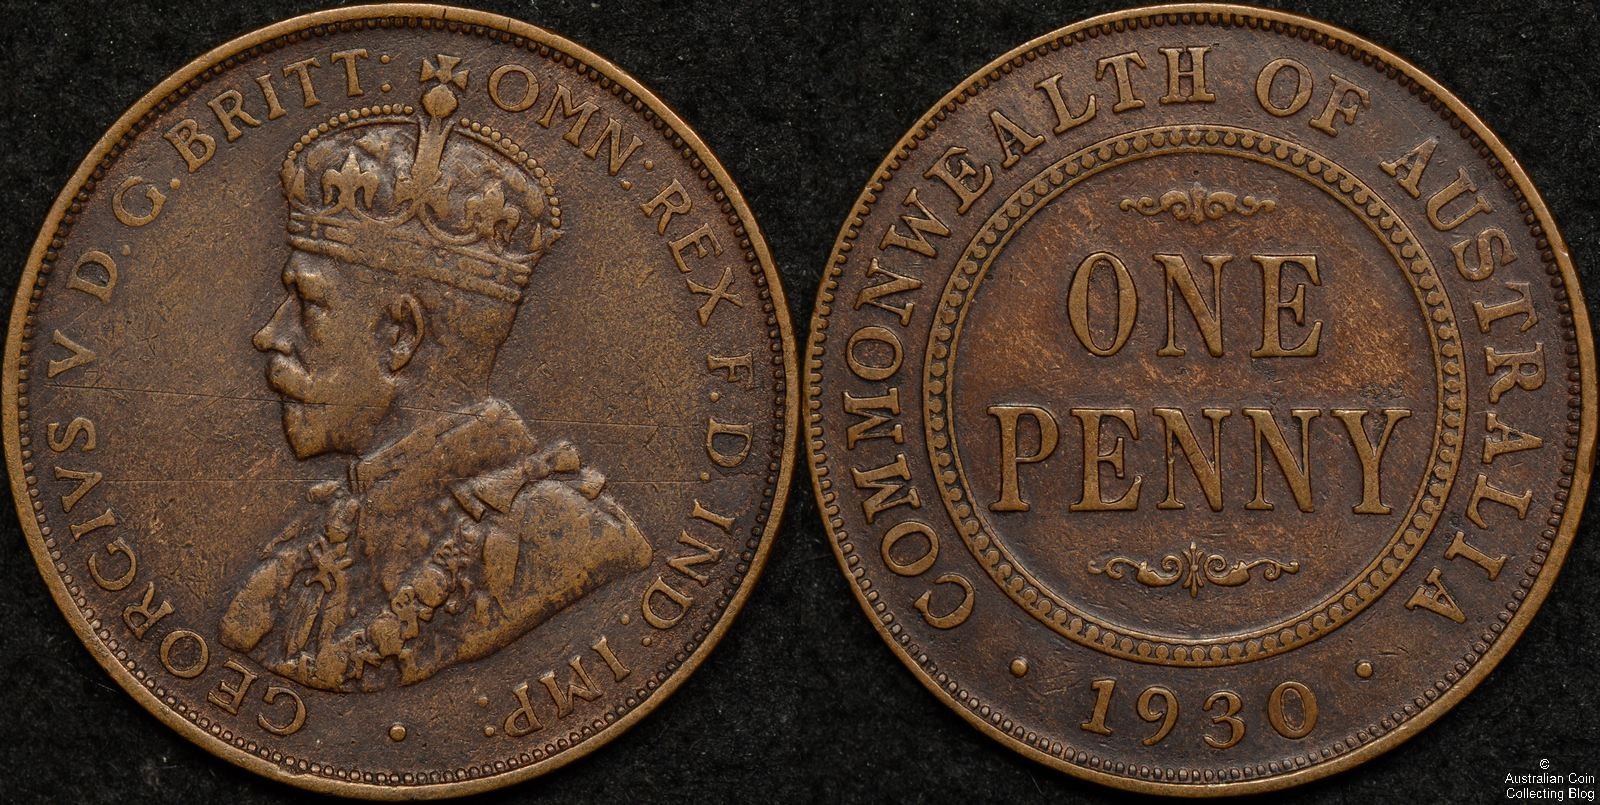 Australia 1930 Penny Altered Date